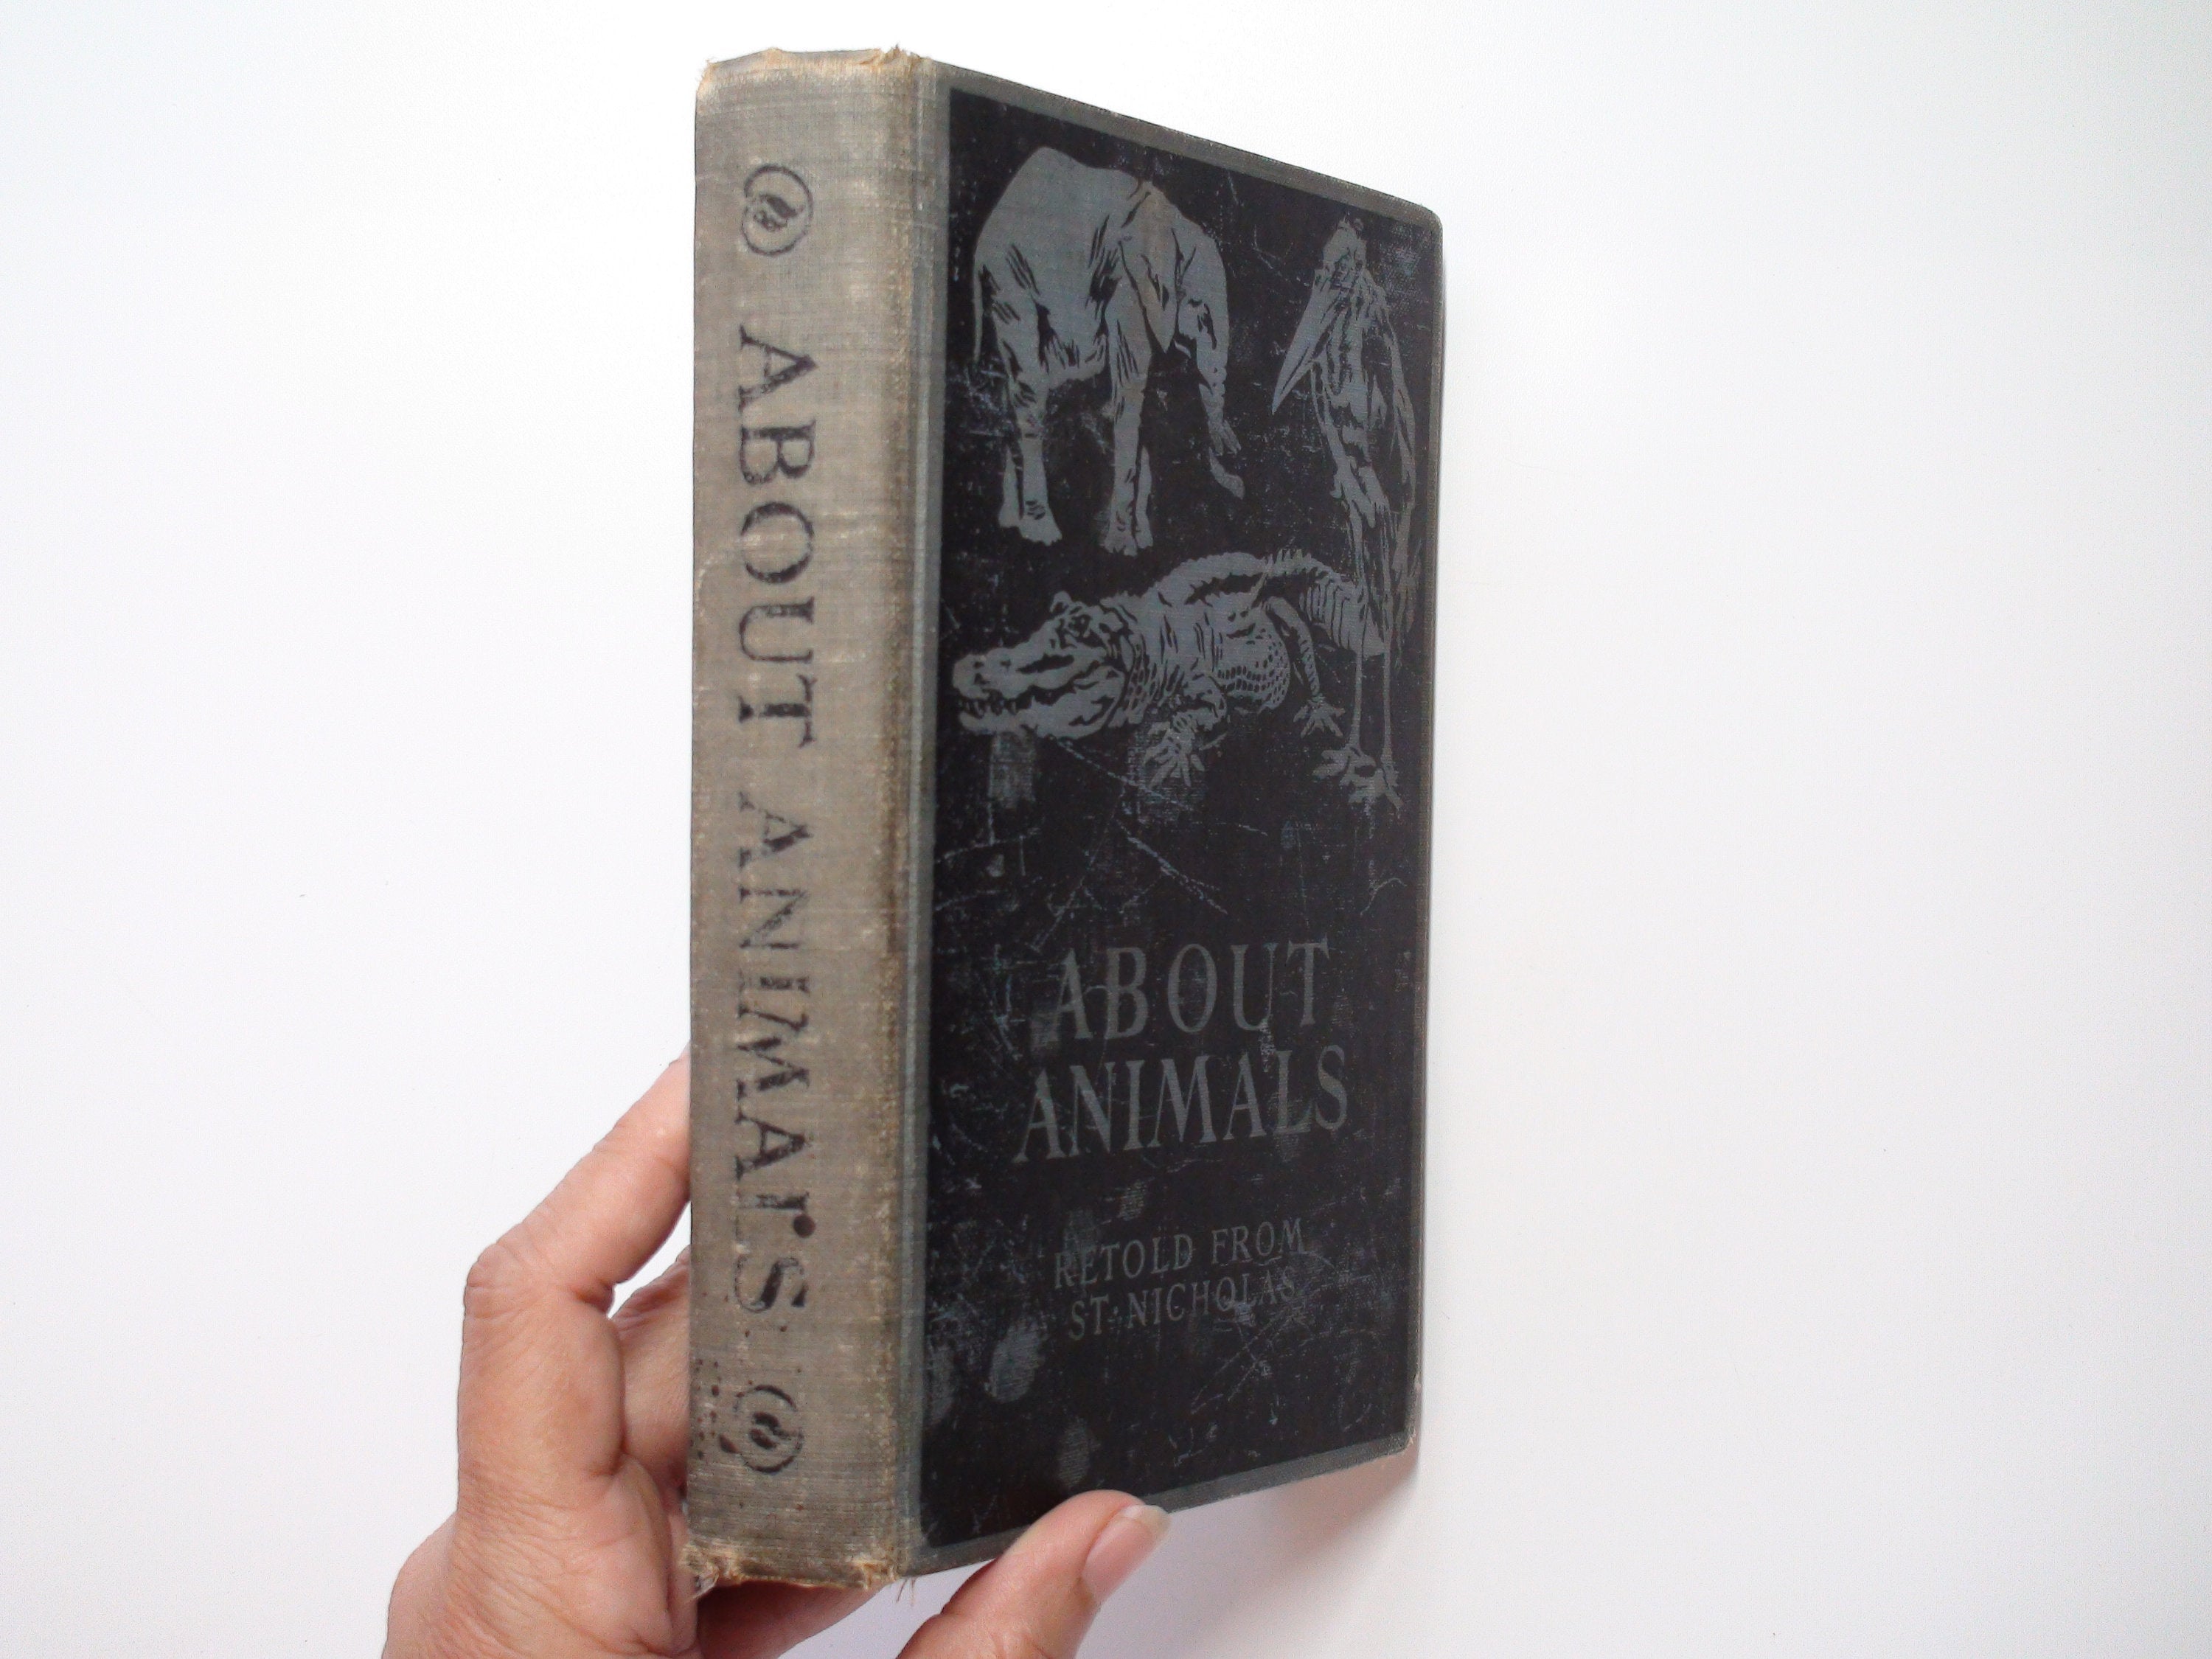 About Animals, Retold from St. Nicholas, Ed. by M. H. Carter, Illustrated, 1904